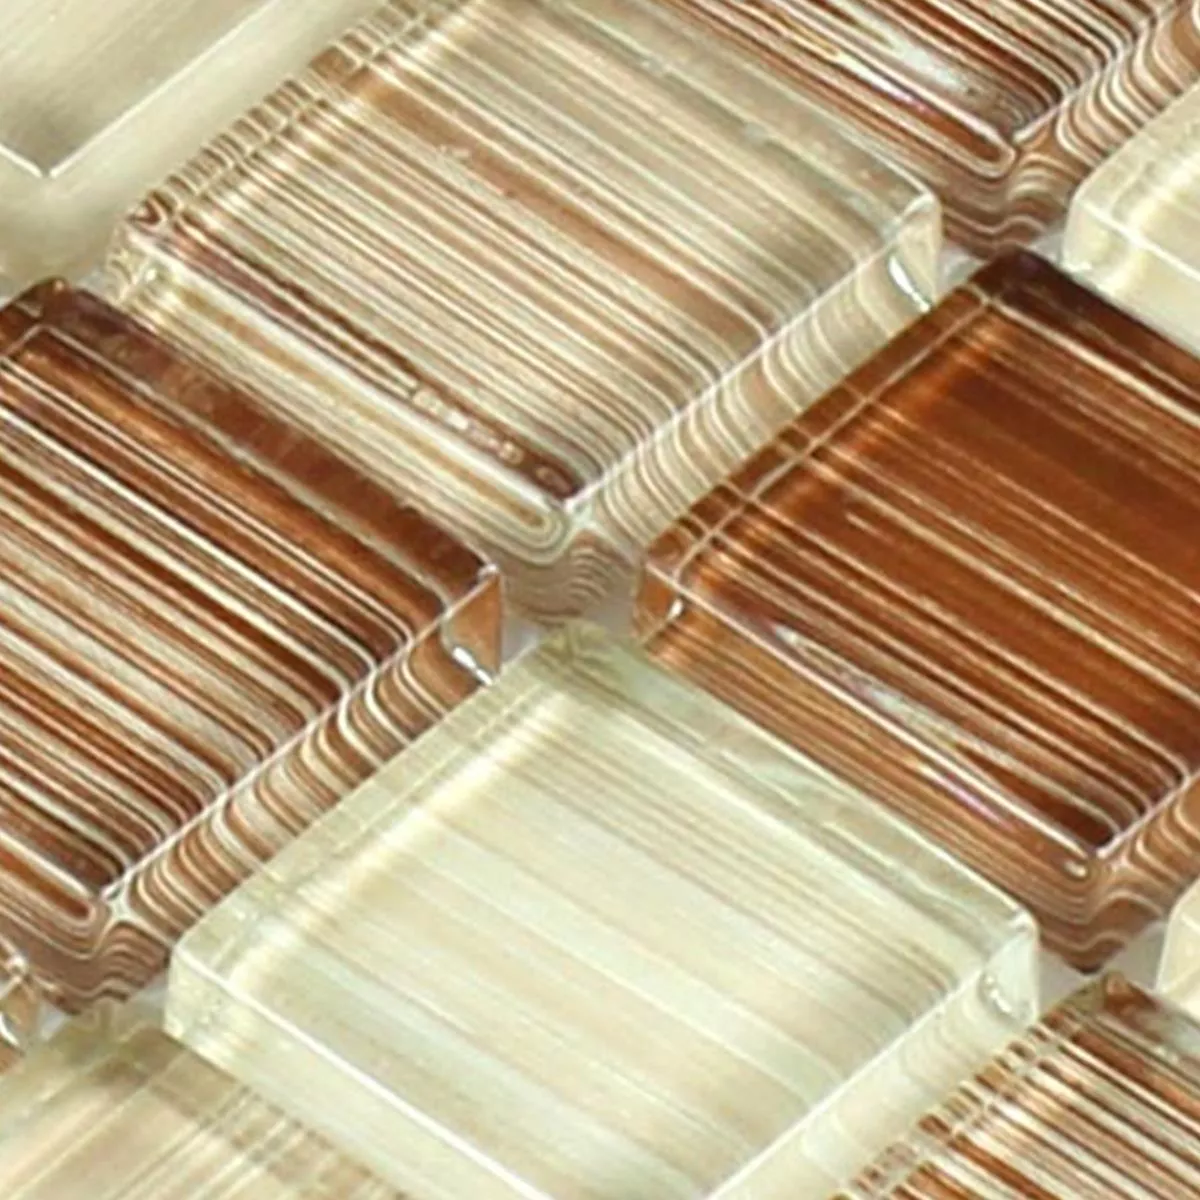 Sample Mosaic Tiles Glass Brown Beige Striped